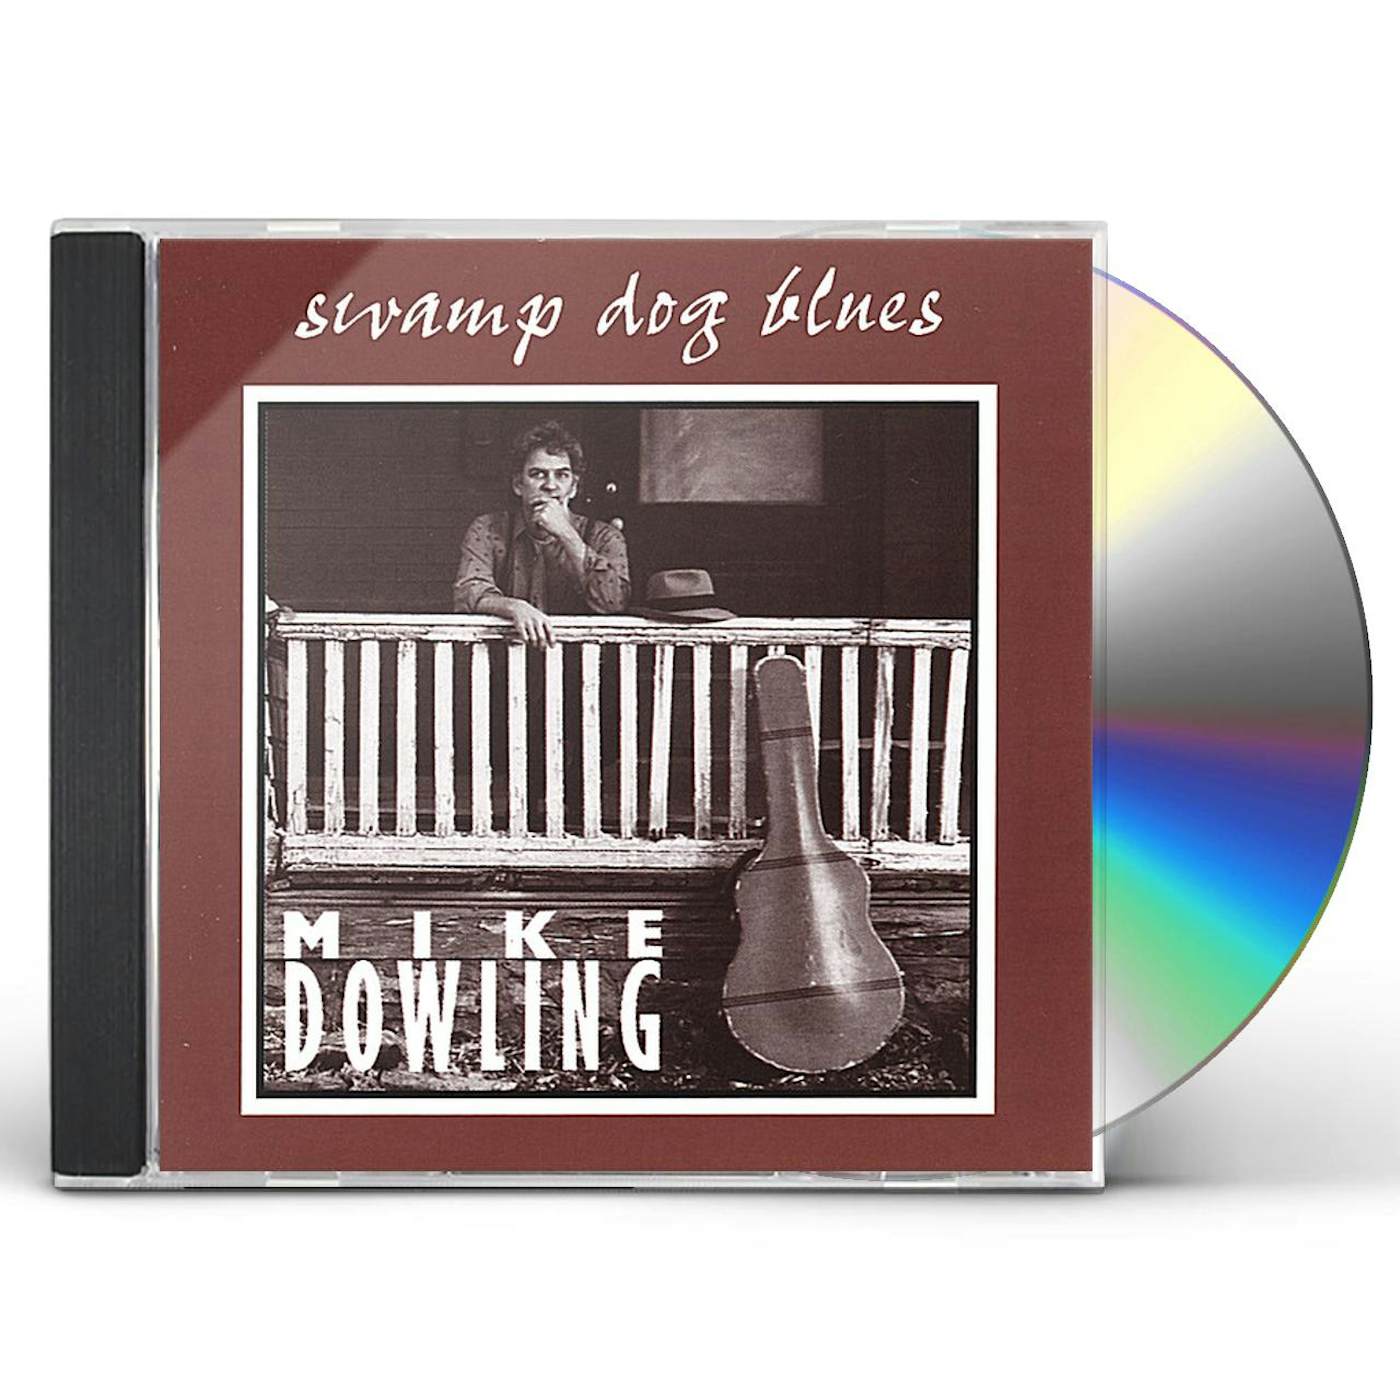 Mike Dowling SWAMP DOG BLUES CD